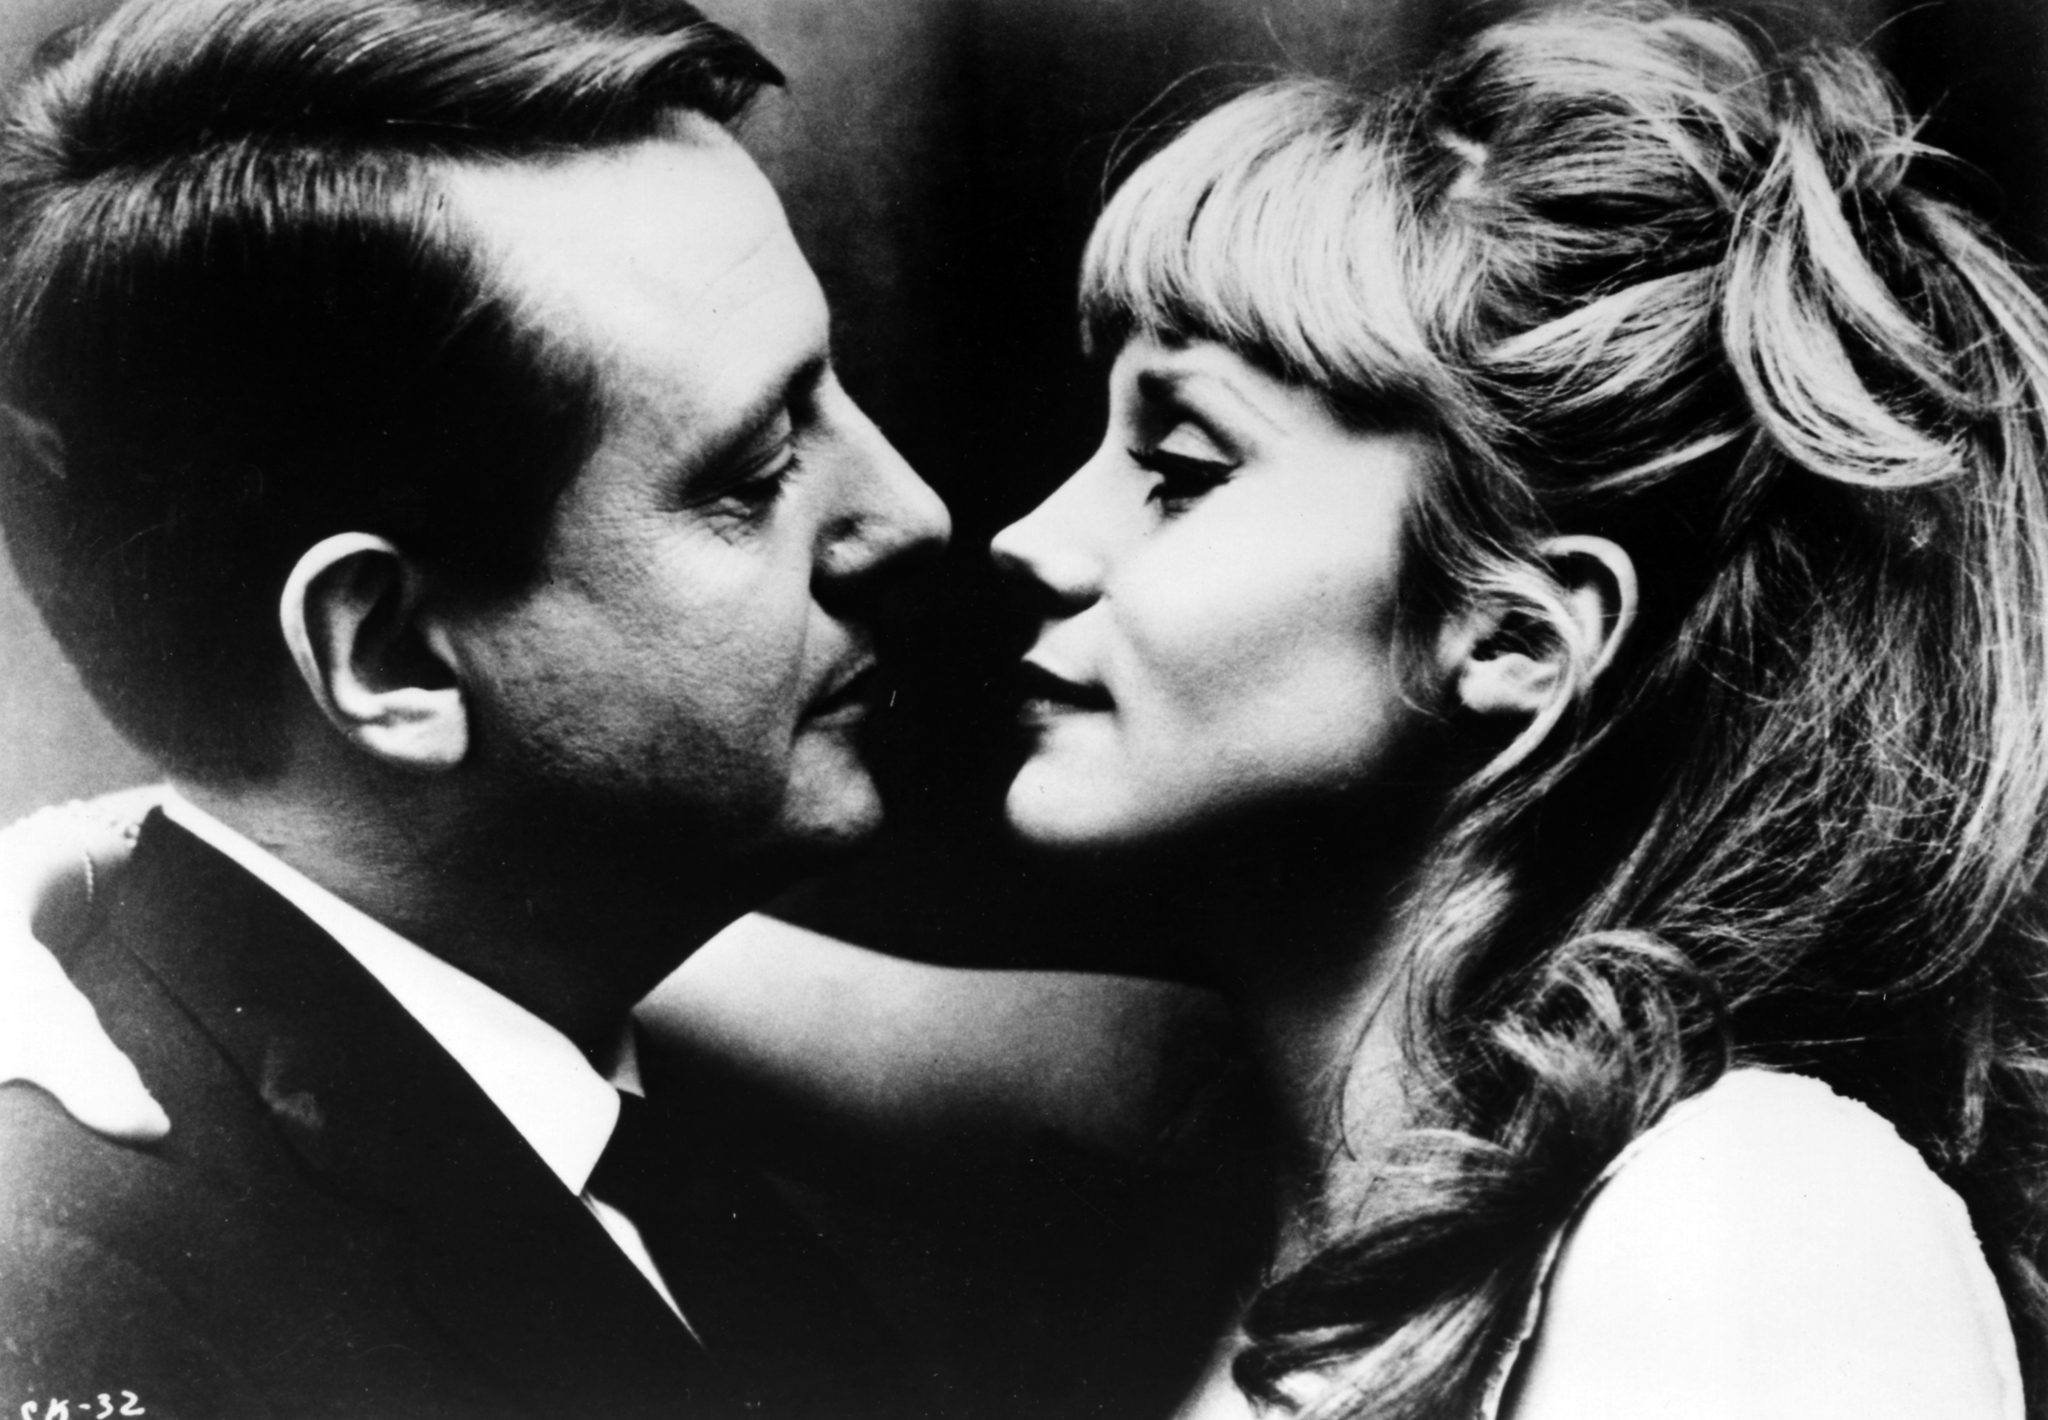 Still of Jean Desailly and Françoise Dorléac in La peau douce (1964)